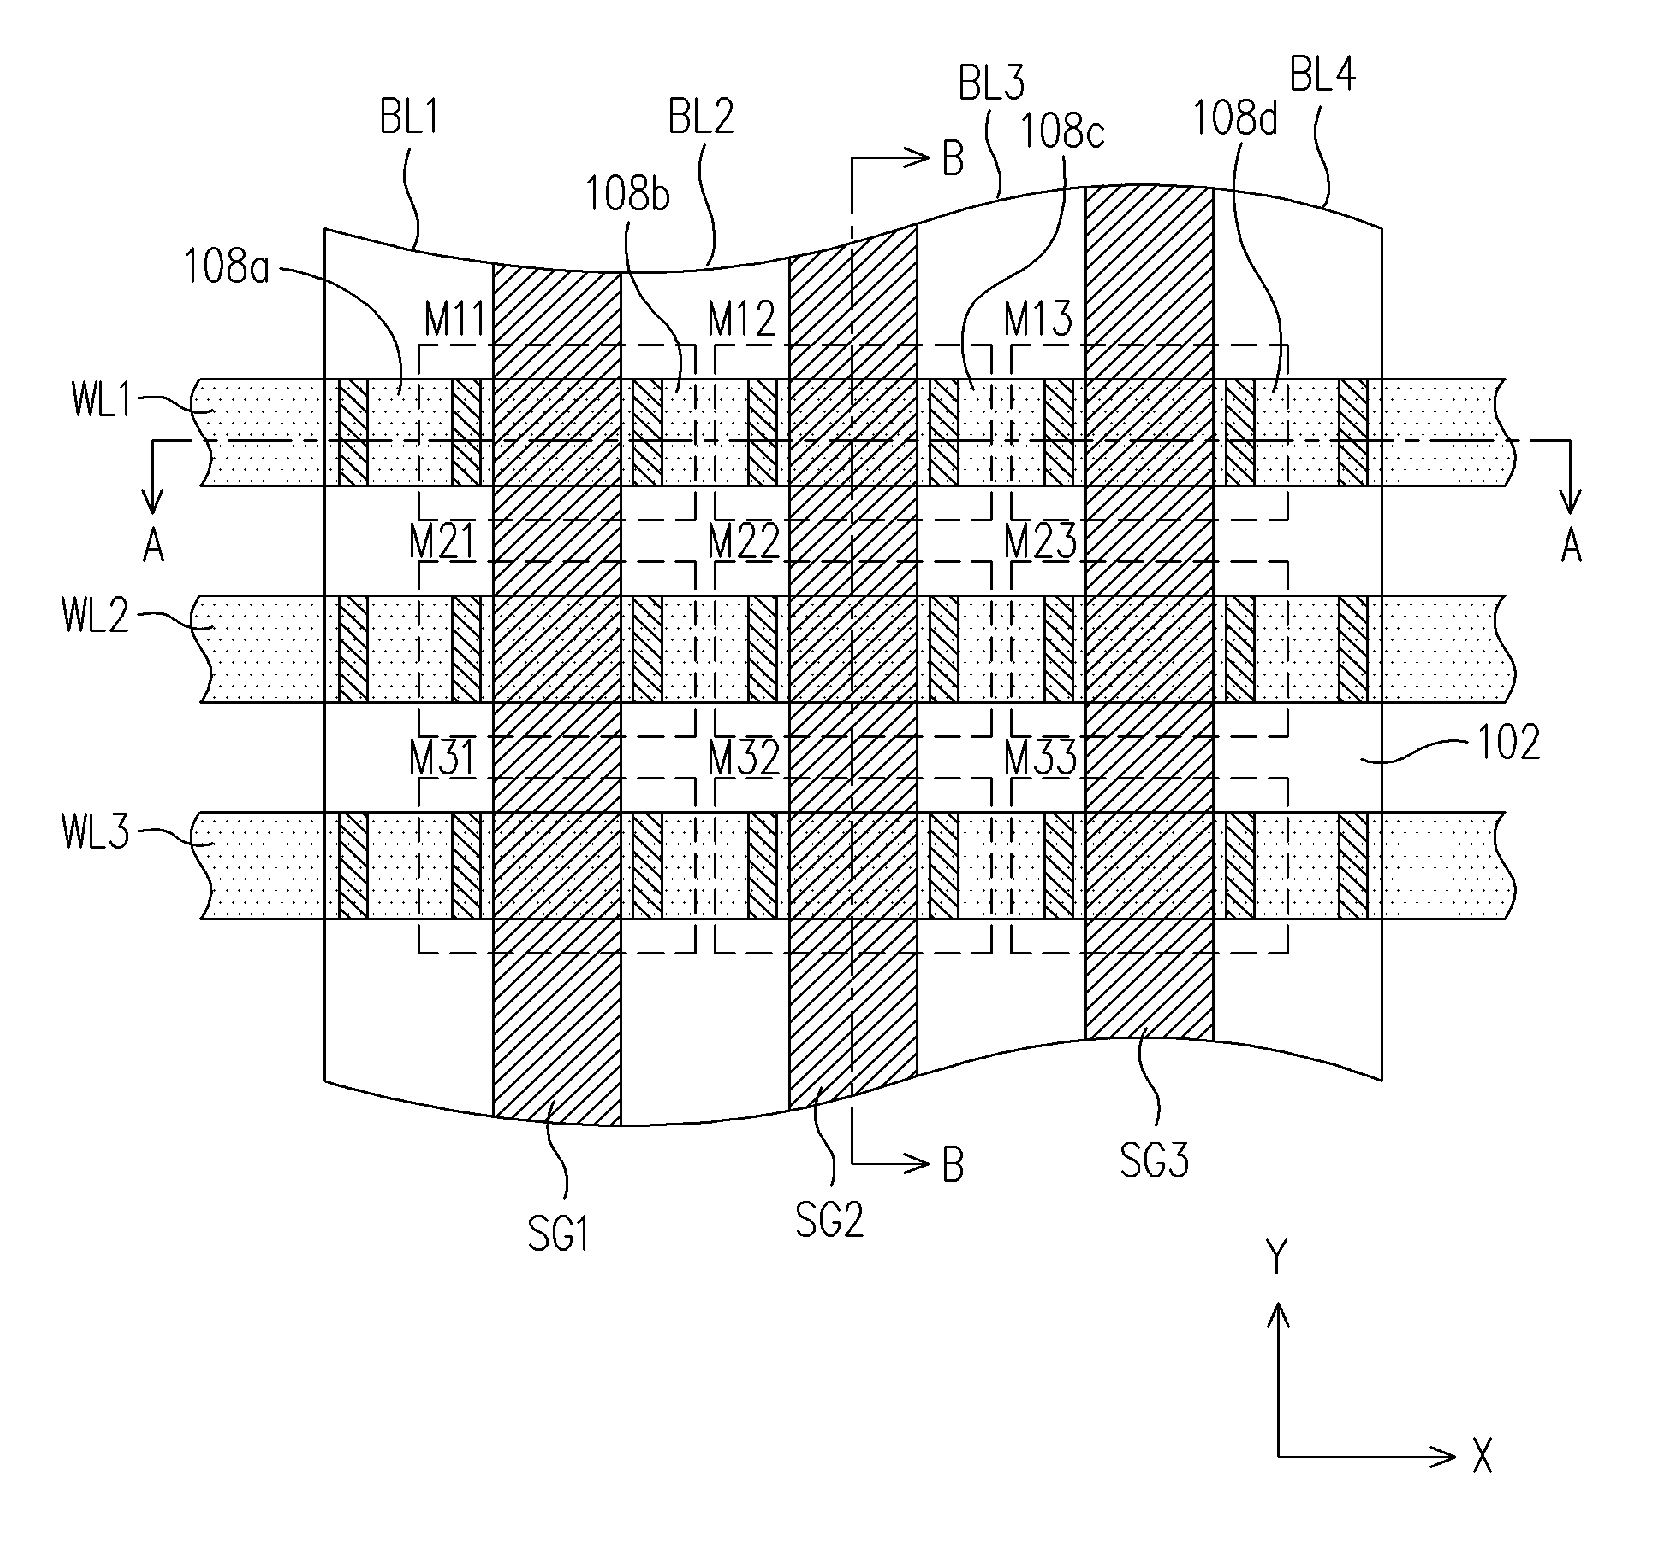 Non-volatile memory, manufacturing and operating method thereof